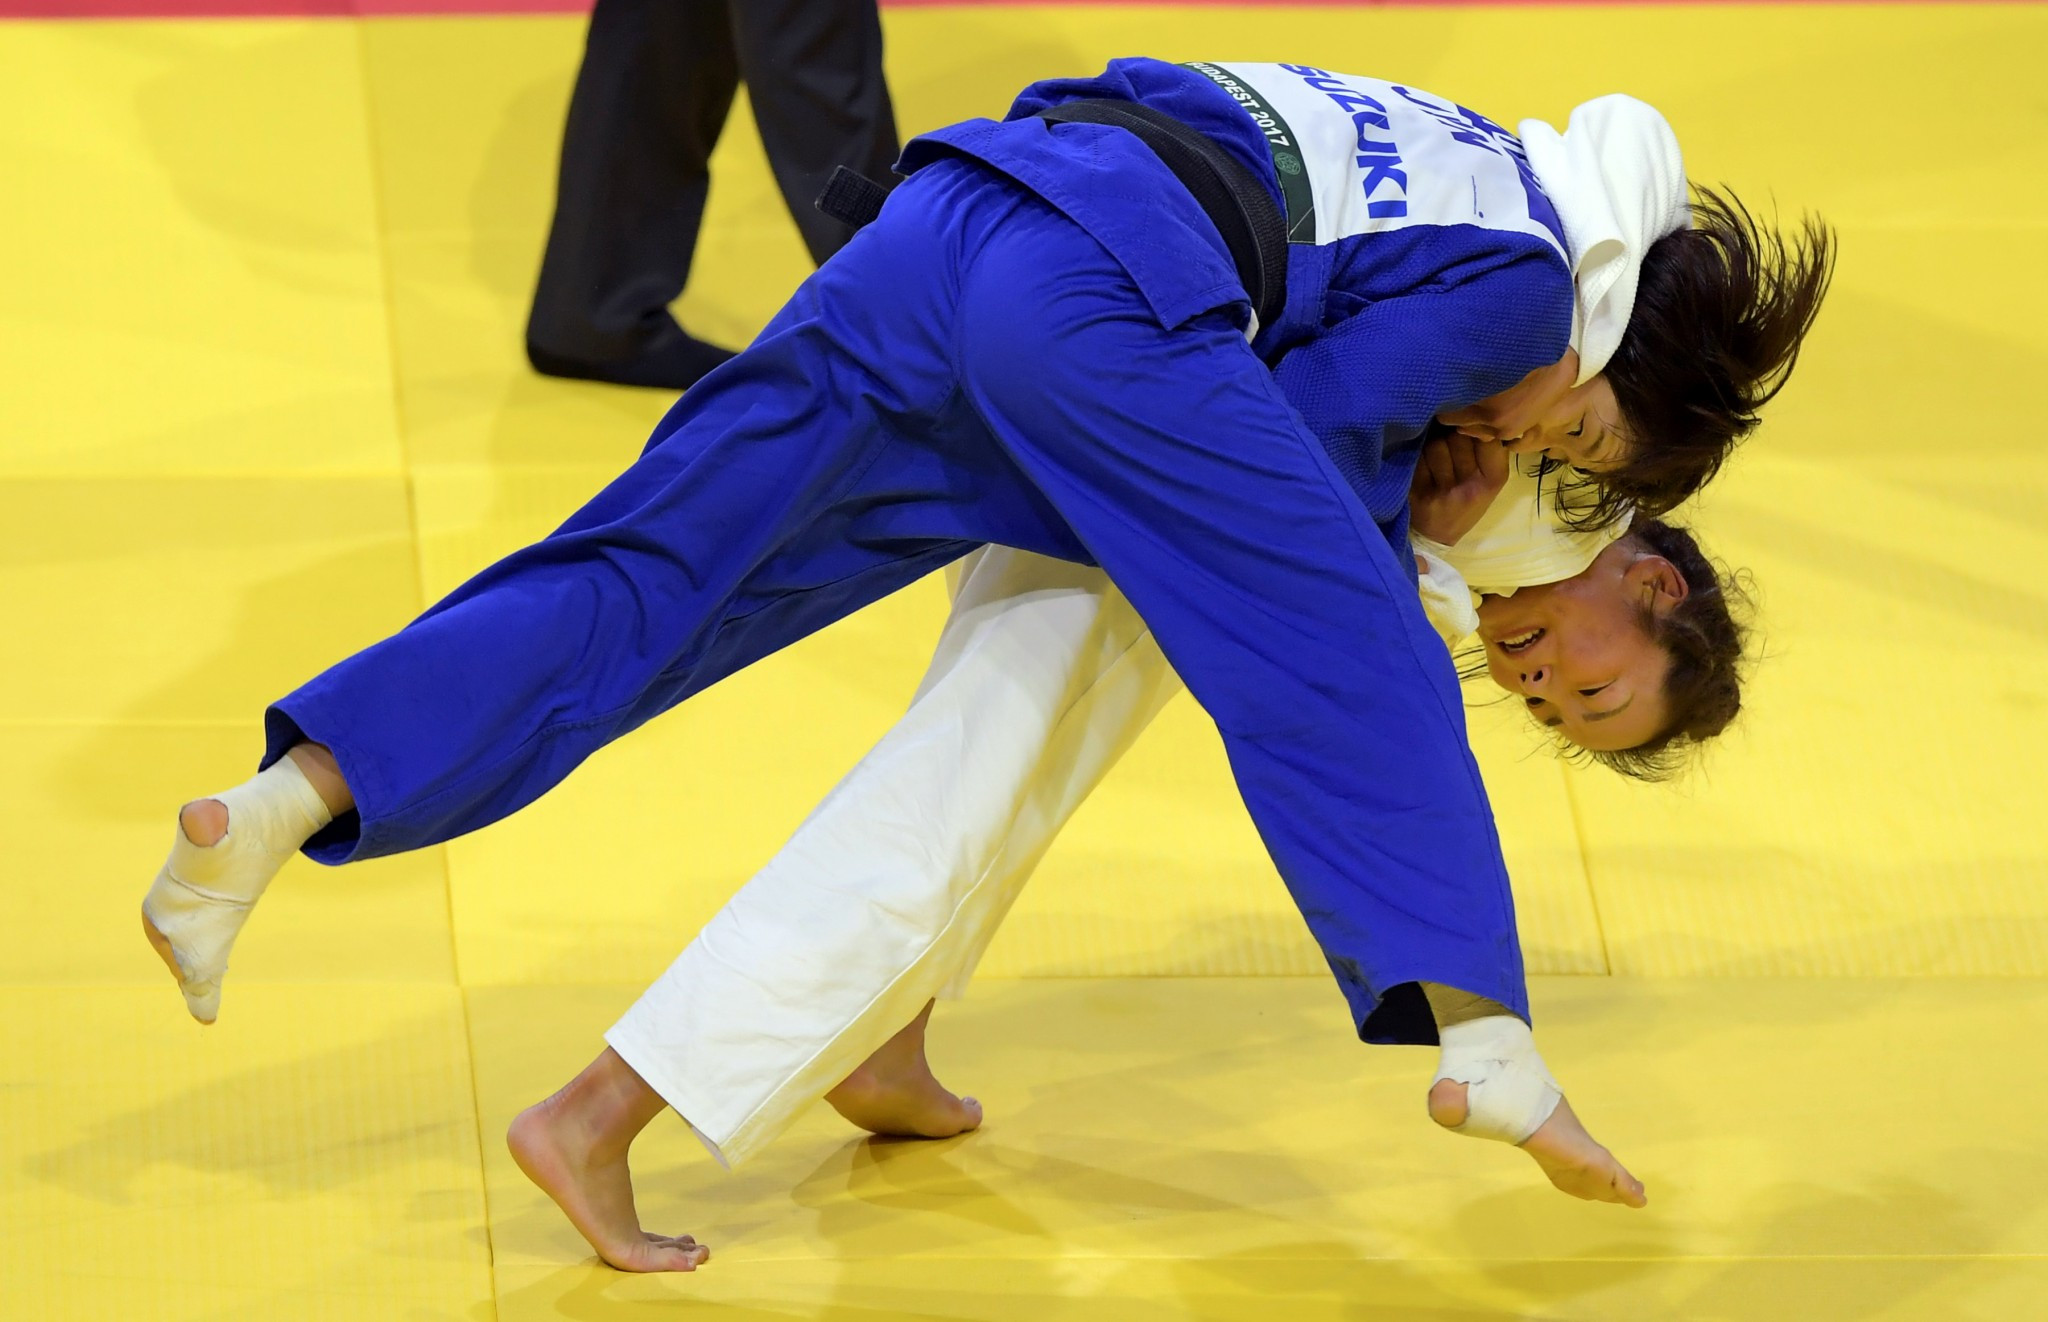 Mongolia's Sumiya Dorjsuren, white, beat Japan's Tsukasa Yoshida in the golden score period in the final of the under 57kg division ©Getty Images